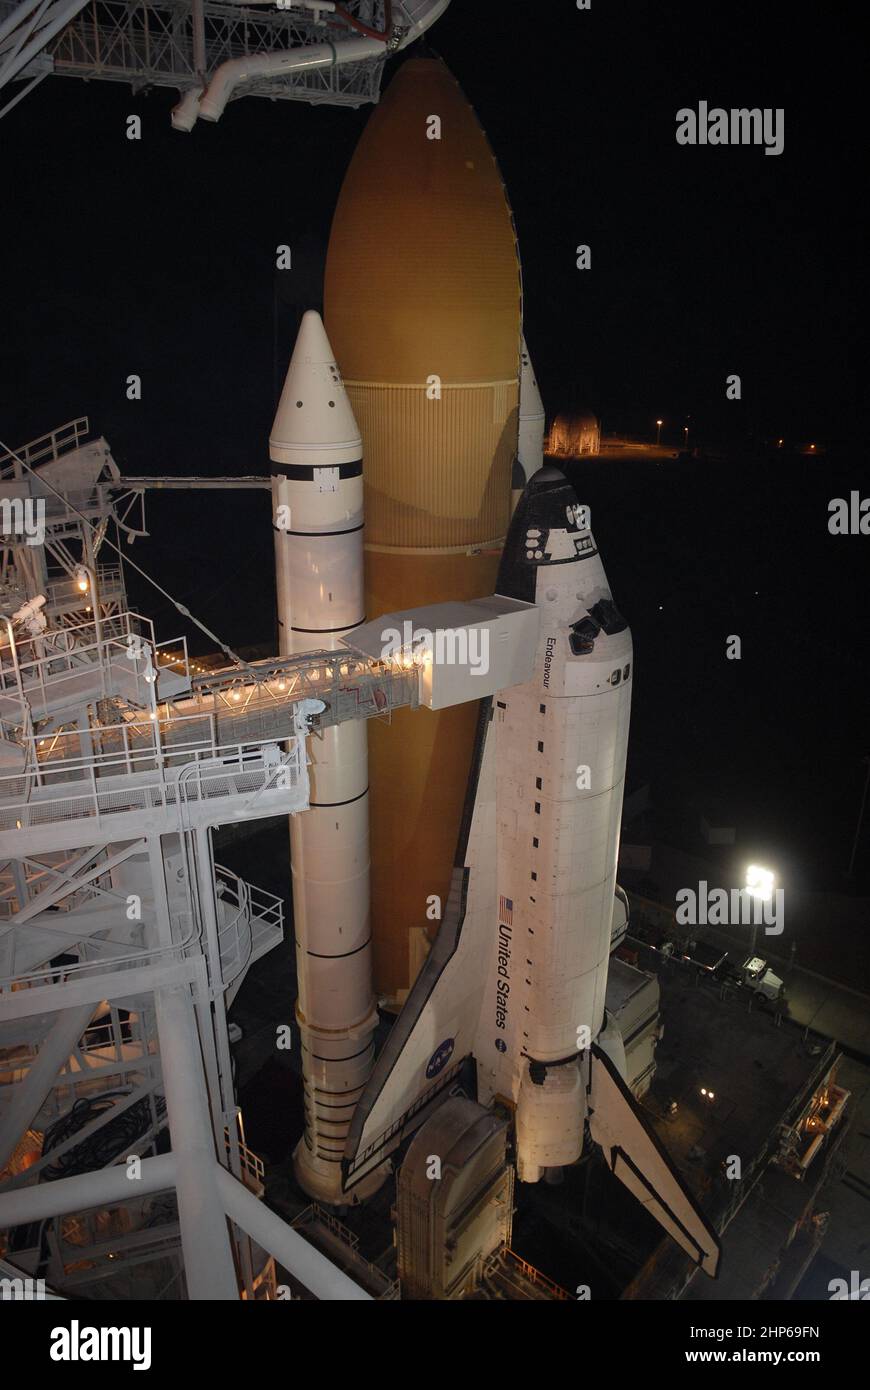 On Launch Pad 39A at NASA's Kennedy Space Center in Florida, the orbiter access arm and White Room are extended toward space shuttle Endeavour after rollback of the rotating service structure ca. 2008 Stock Photo